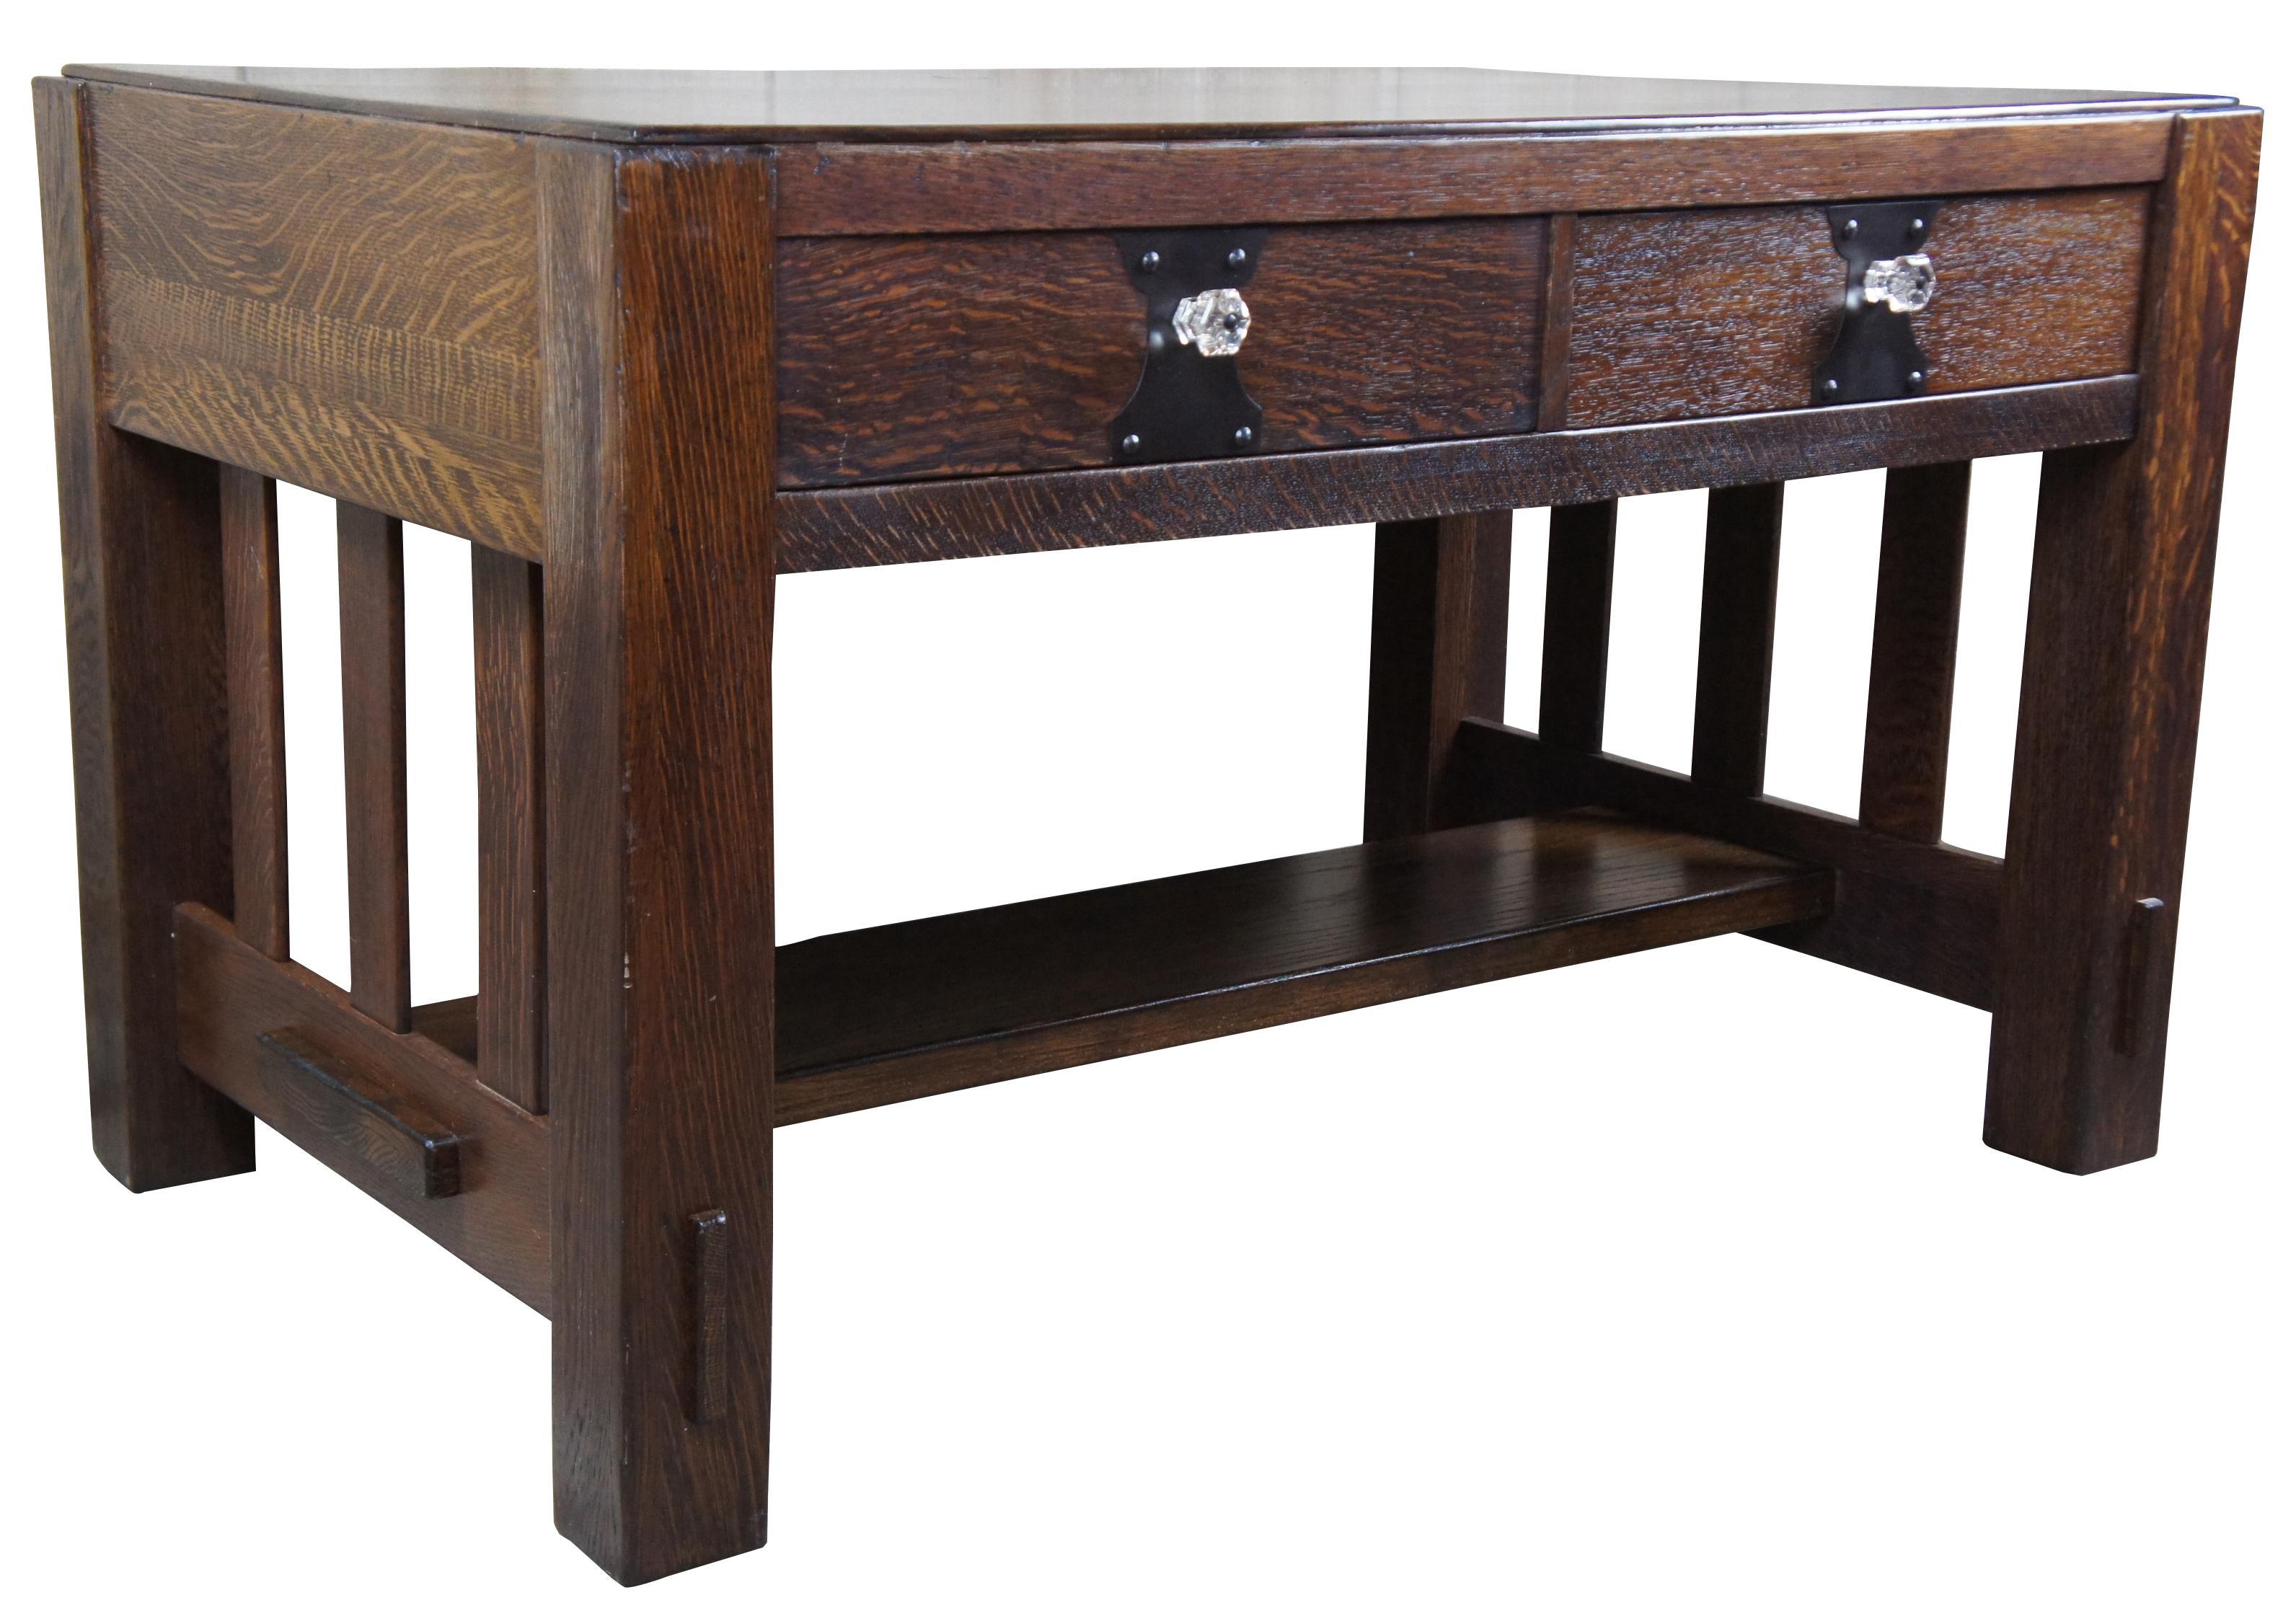 Vintage quartersawn oak library writing desk or table. Features two long dovetailed drawers, iron hardware and glass knobs. Made during the latter half of the 20th century.
  